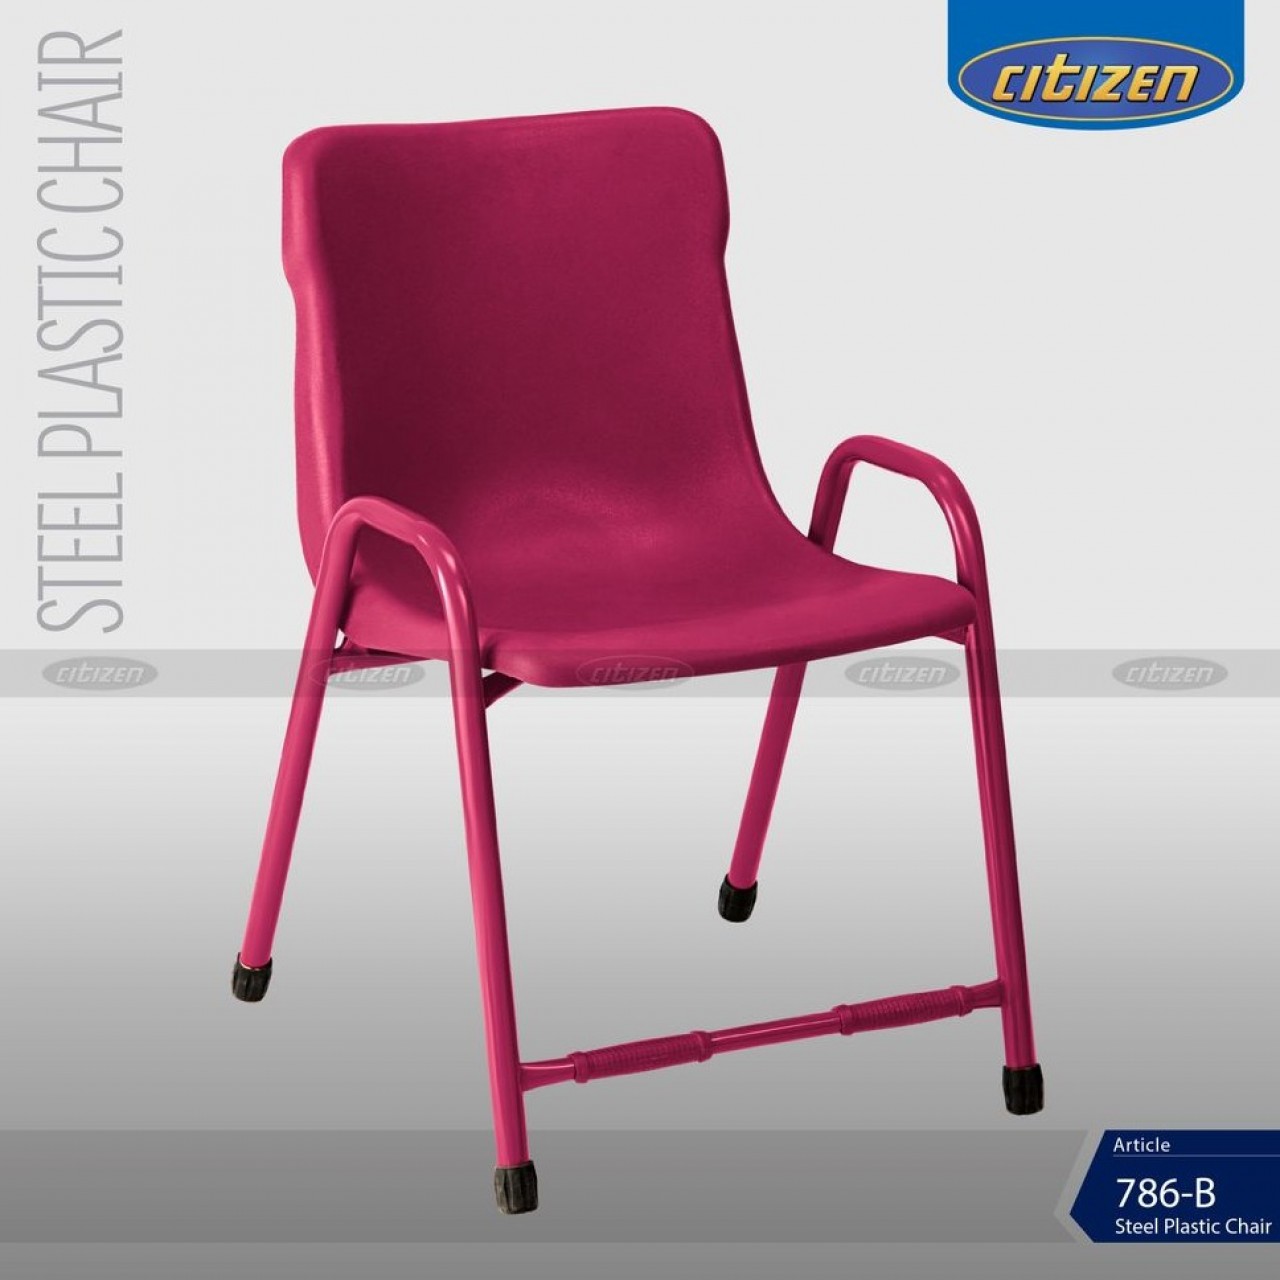 Citizen 786-B Steel & Plastic Chair With Low Armrest